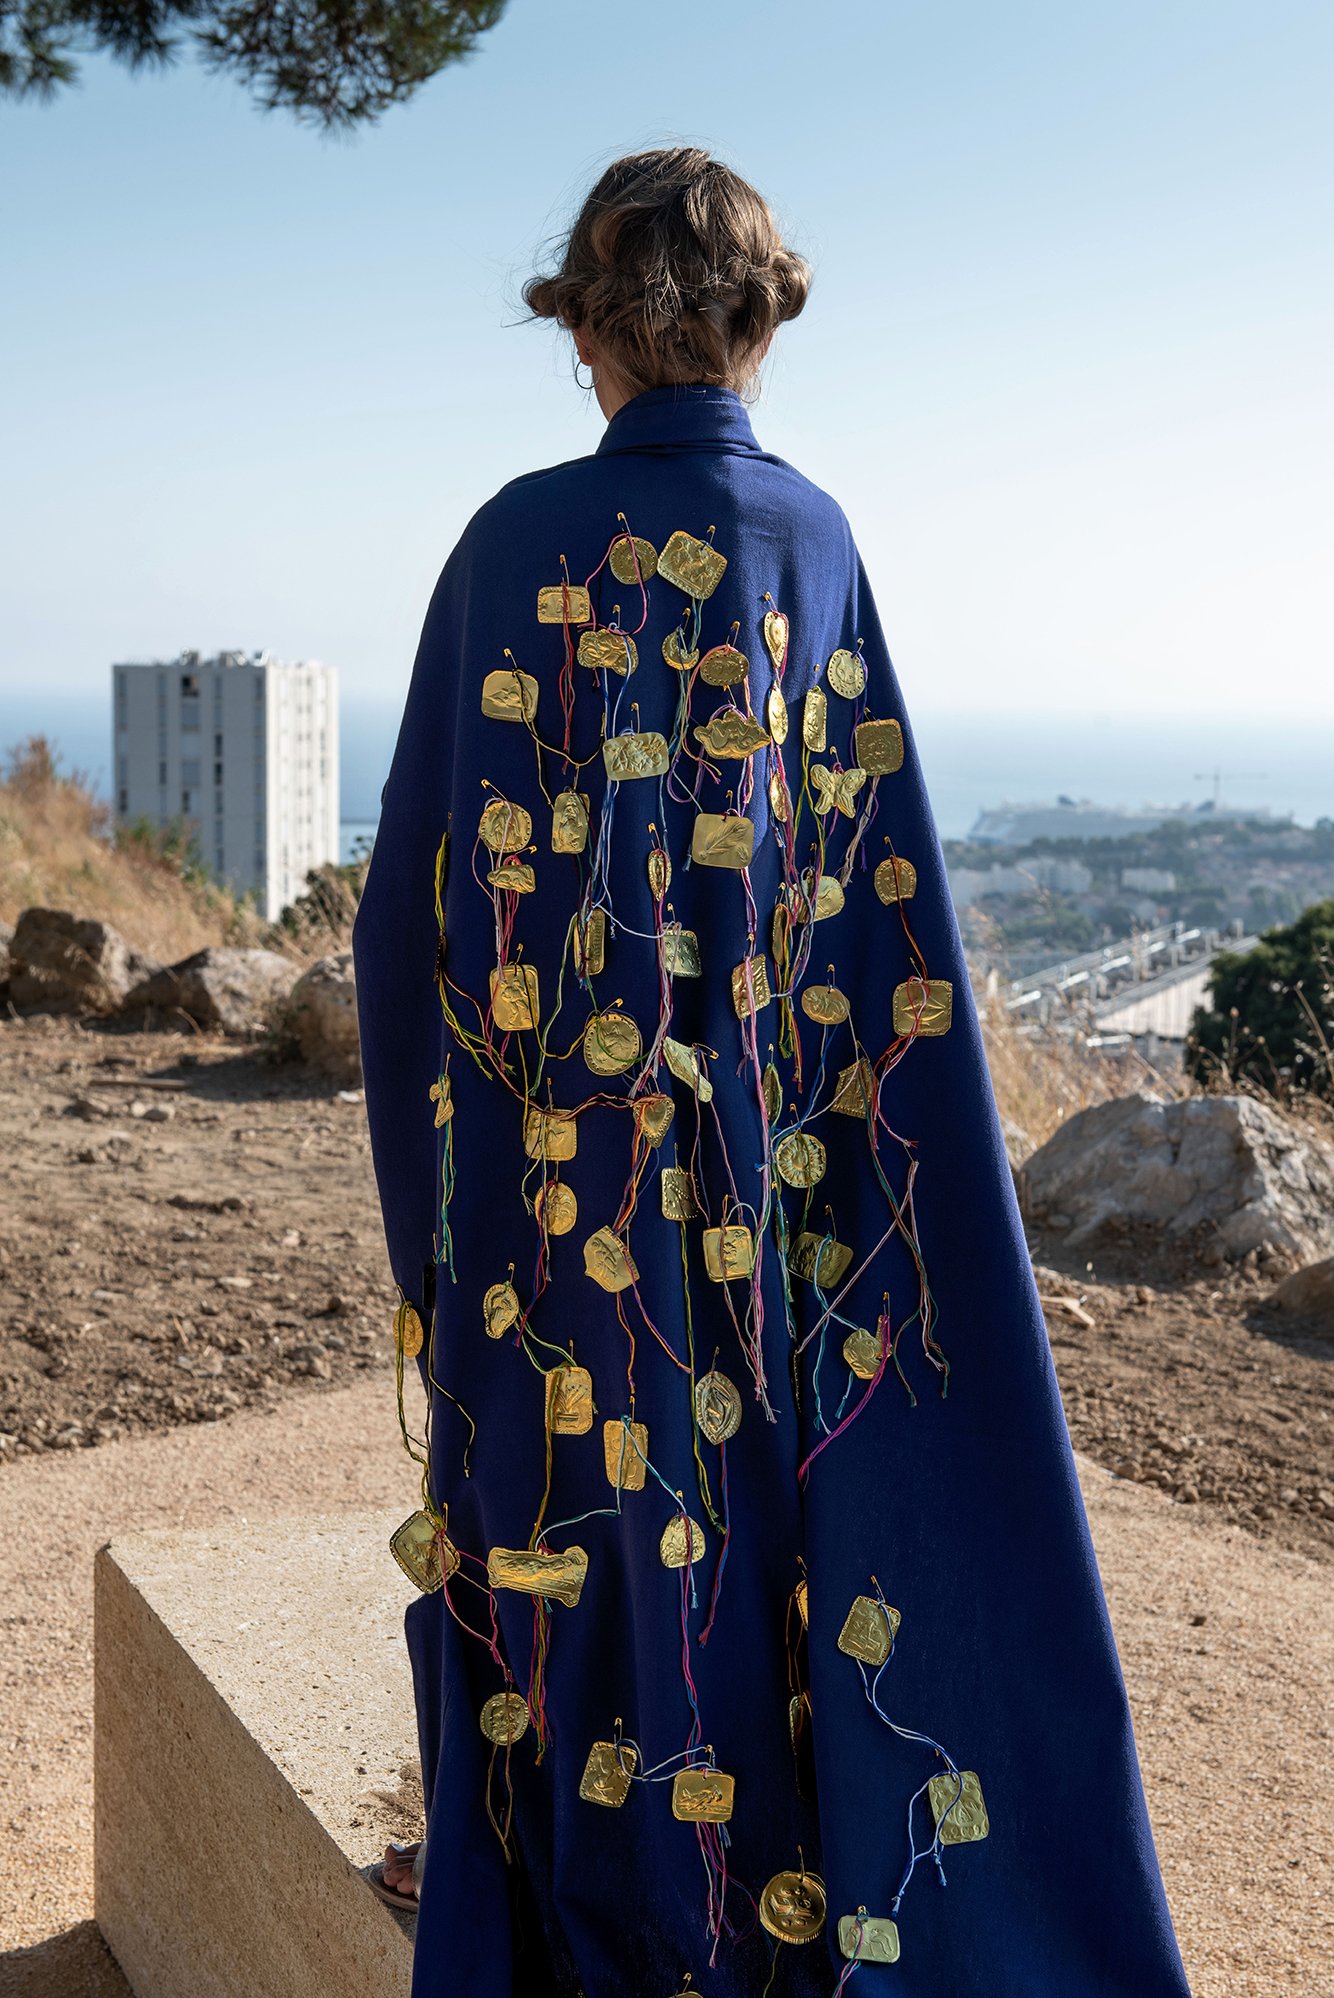 A person standing on a stone overlooking lower ground of a town by the sea. The person is pictured wearing a deep blue coat with dozens of gold medallions pinned to their back, and multi-colored threads streaming out from underneath.